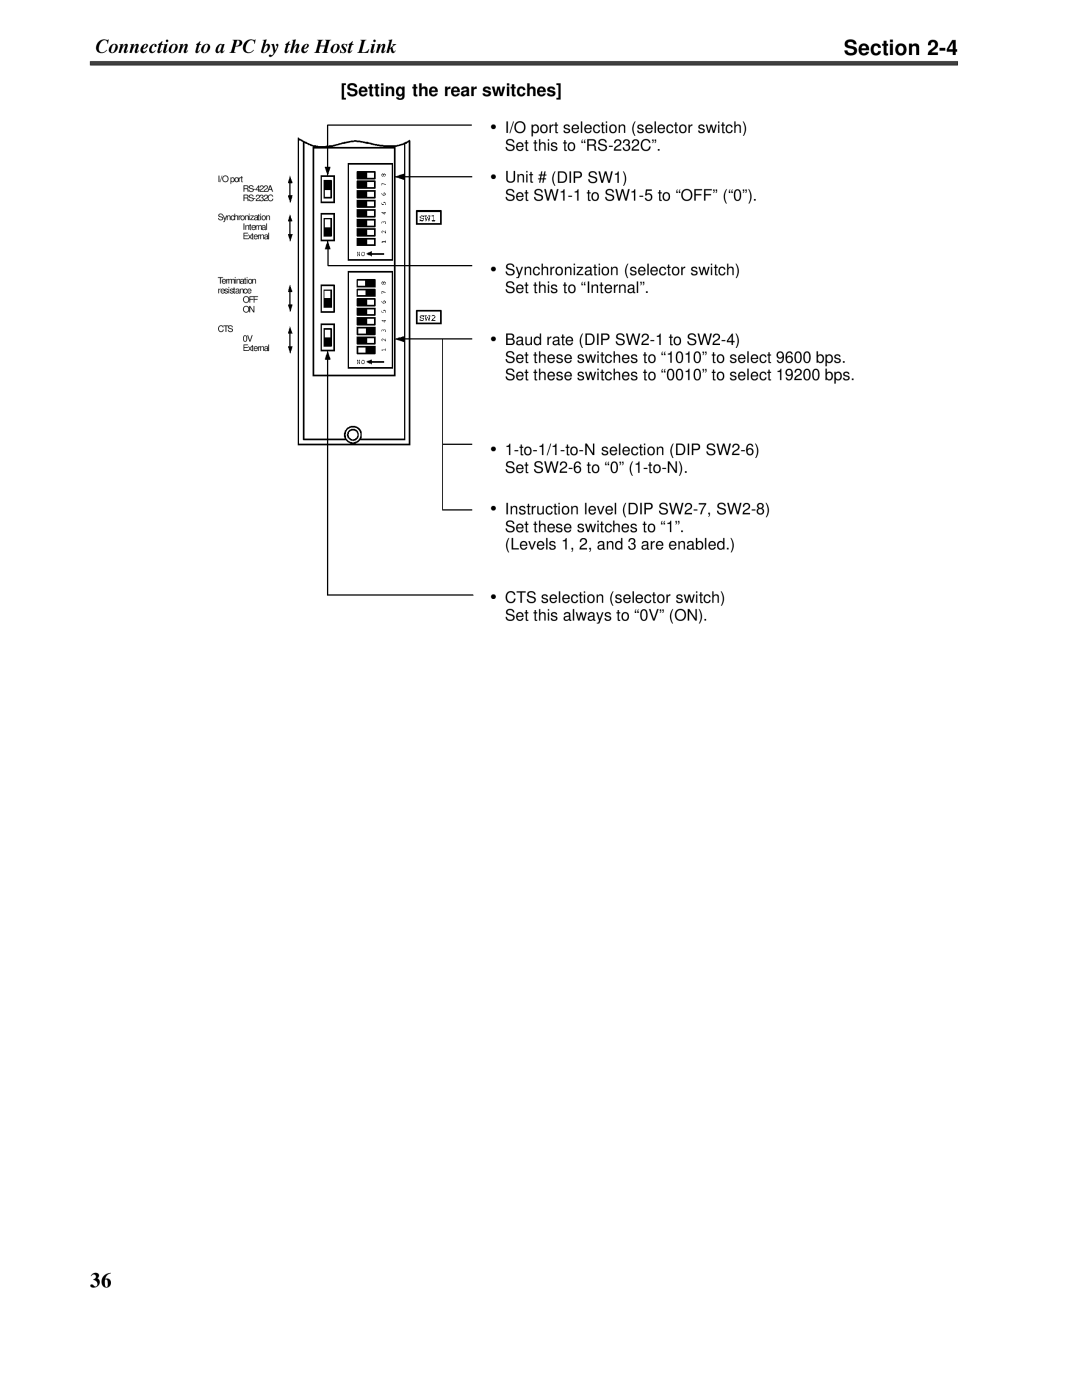 Omron V022-E3-1 operation manual Section, Setting the rear switches, I/O port selection selector switch 